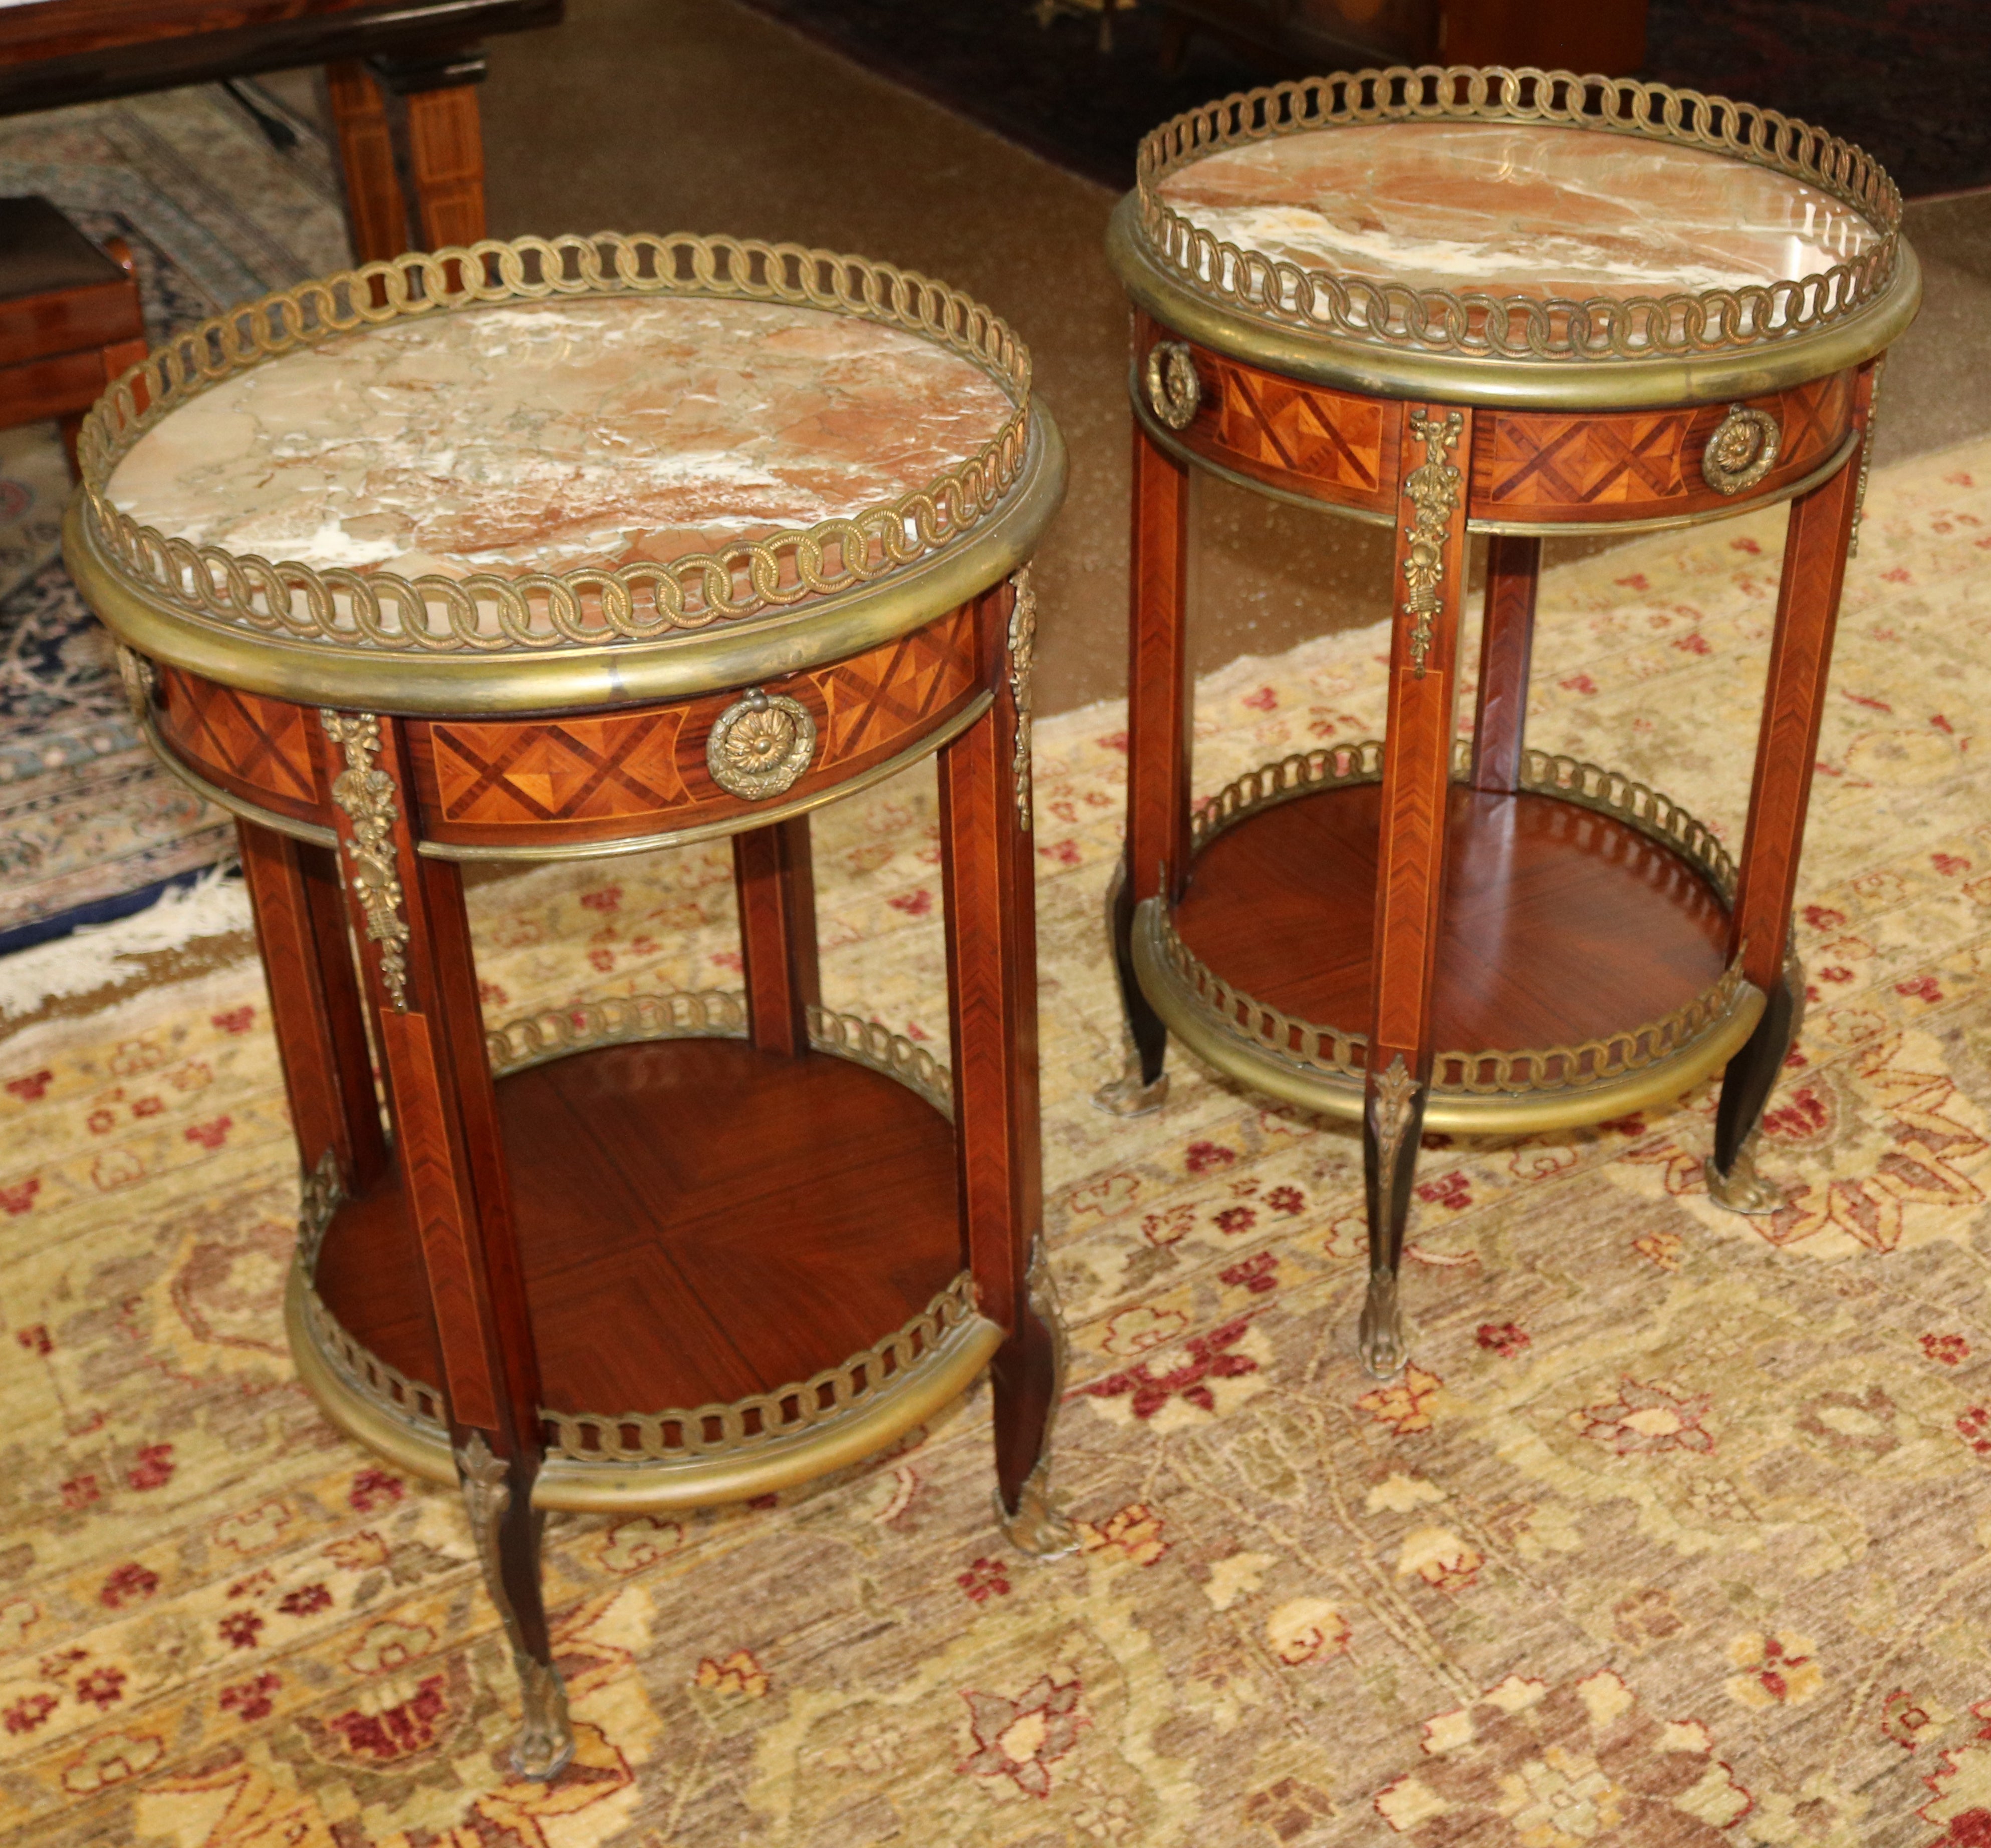 Pair of Louis XV Bronze Mounted Inlaid Marble Top End Table Gueridons

Dimensions : 30.5